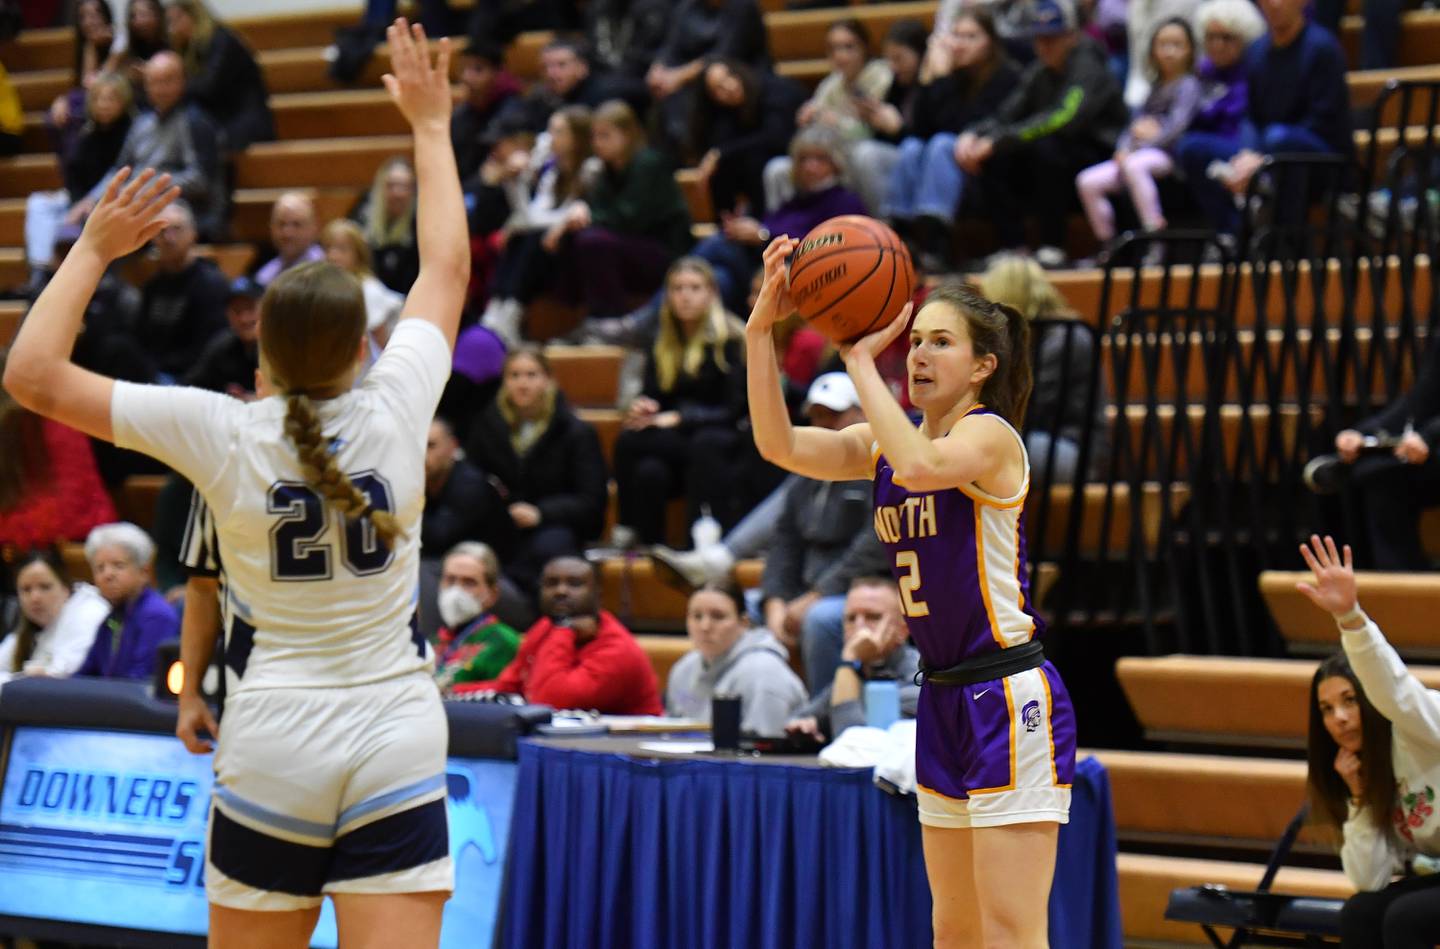 Downers Grove North's Violet Mitchell (right) shoots for three points against Downers Grove South during a crosstown game on Dec. 17, 2022 at Downers Grove South High School in Downers Grove .